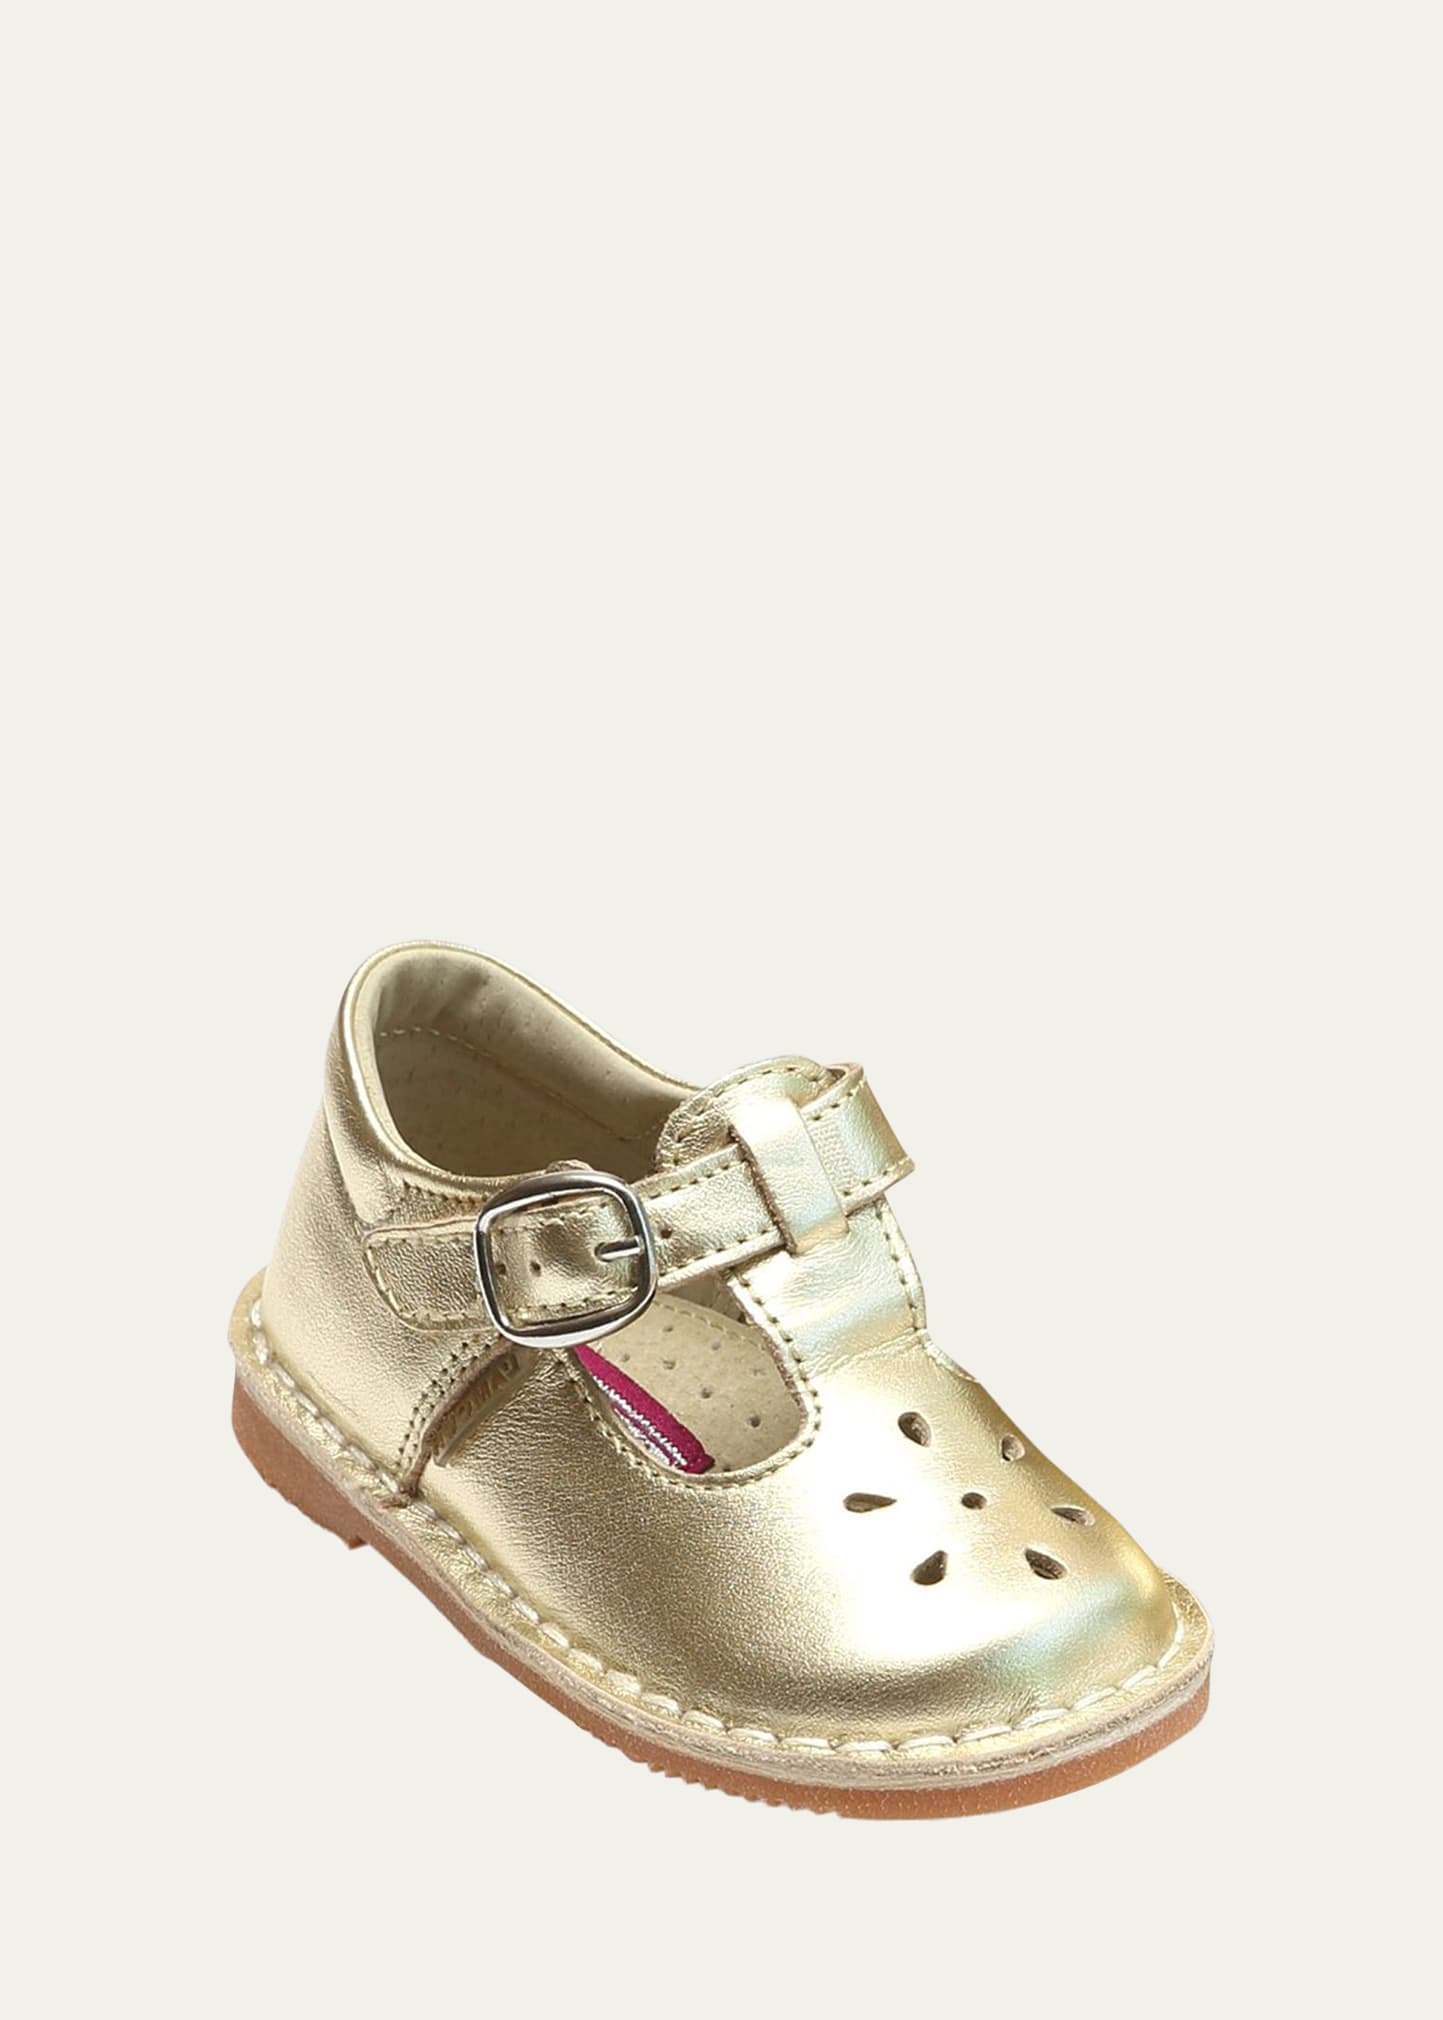 L'amour Shoes Girl's Joy Metallic Leather Cutout T-strap Mary Jane, Baby/toddler/kids In Cognac